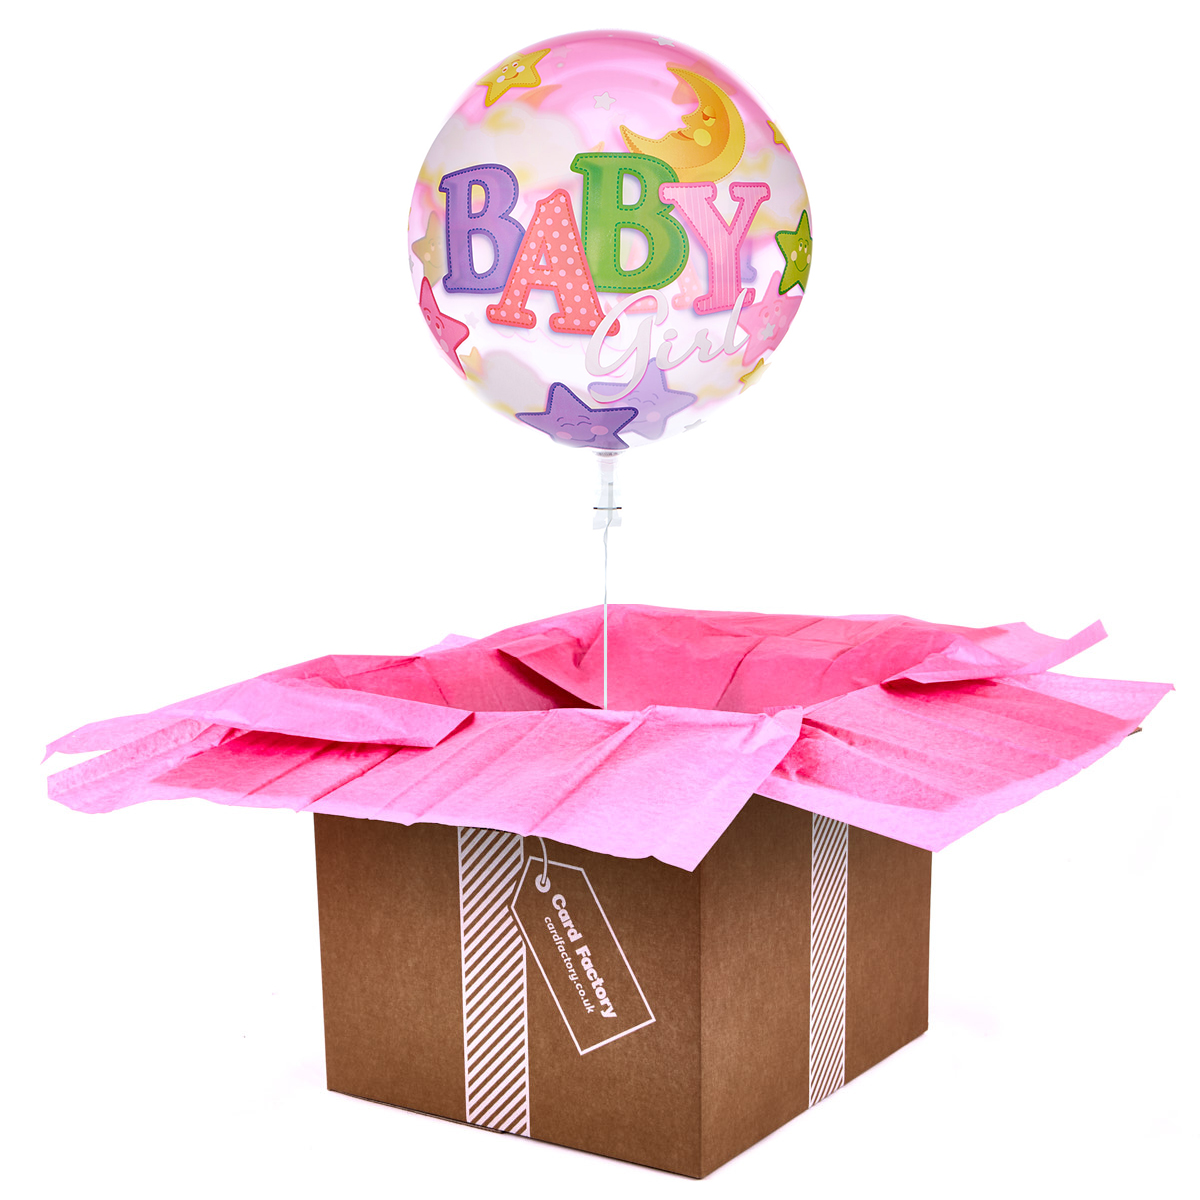 22-Inch Bubble Balloon - Baby Girl - DELIVERED INFLATED!